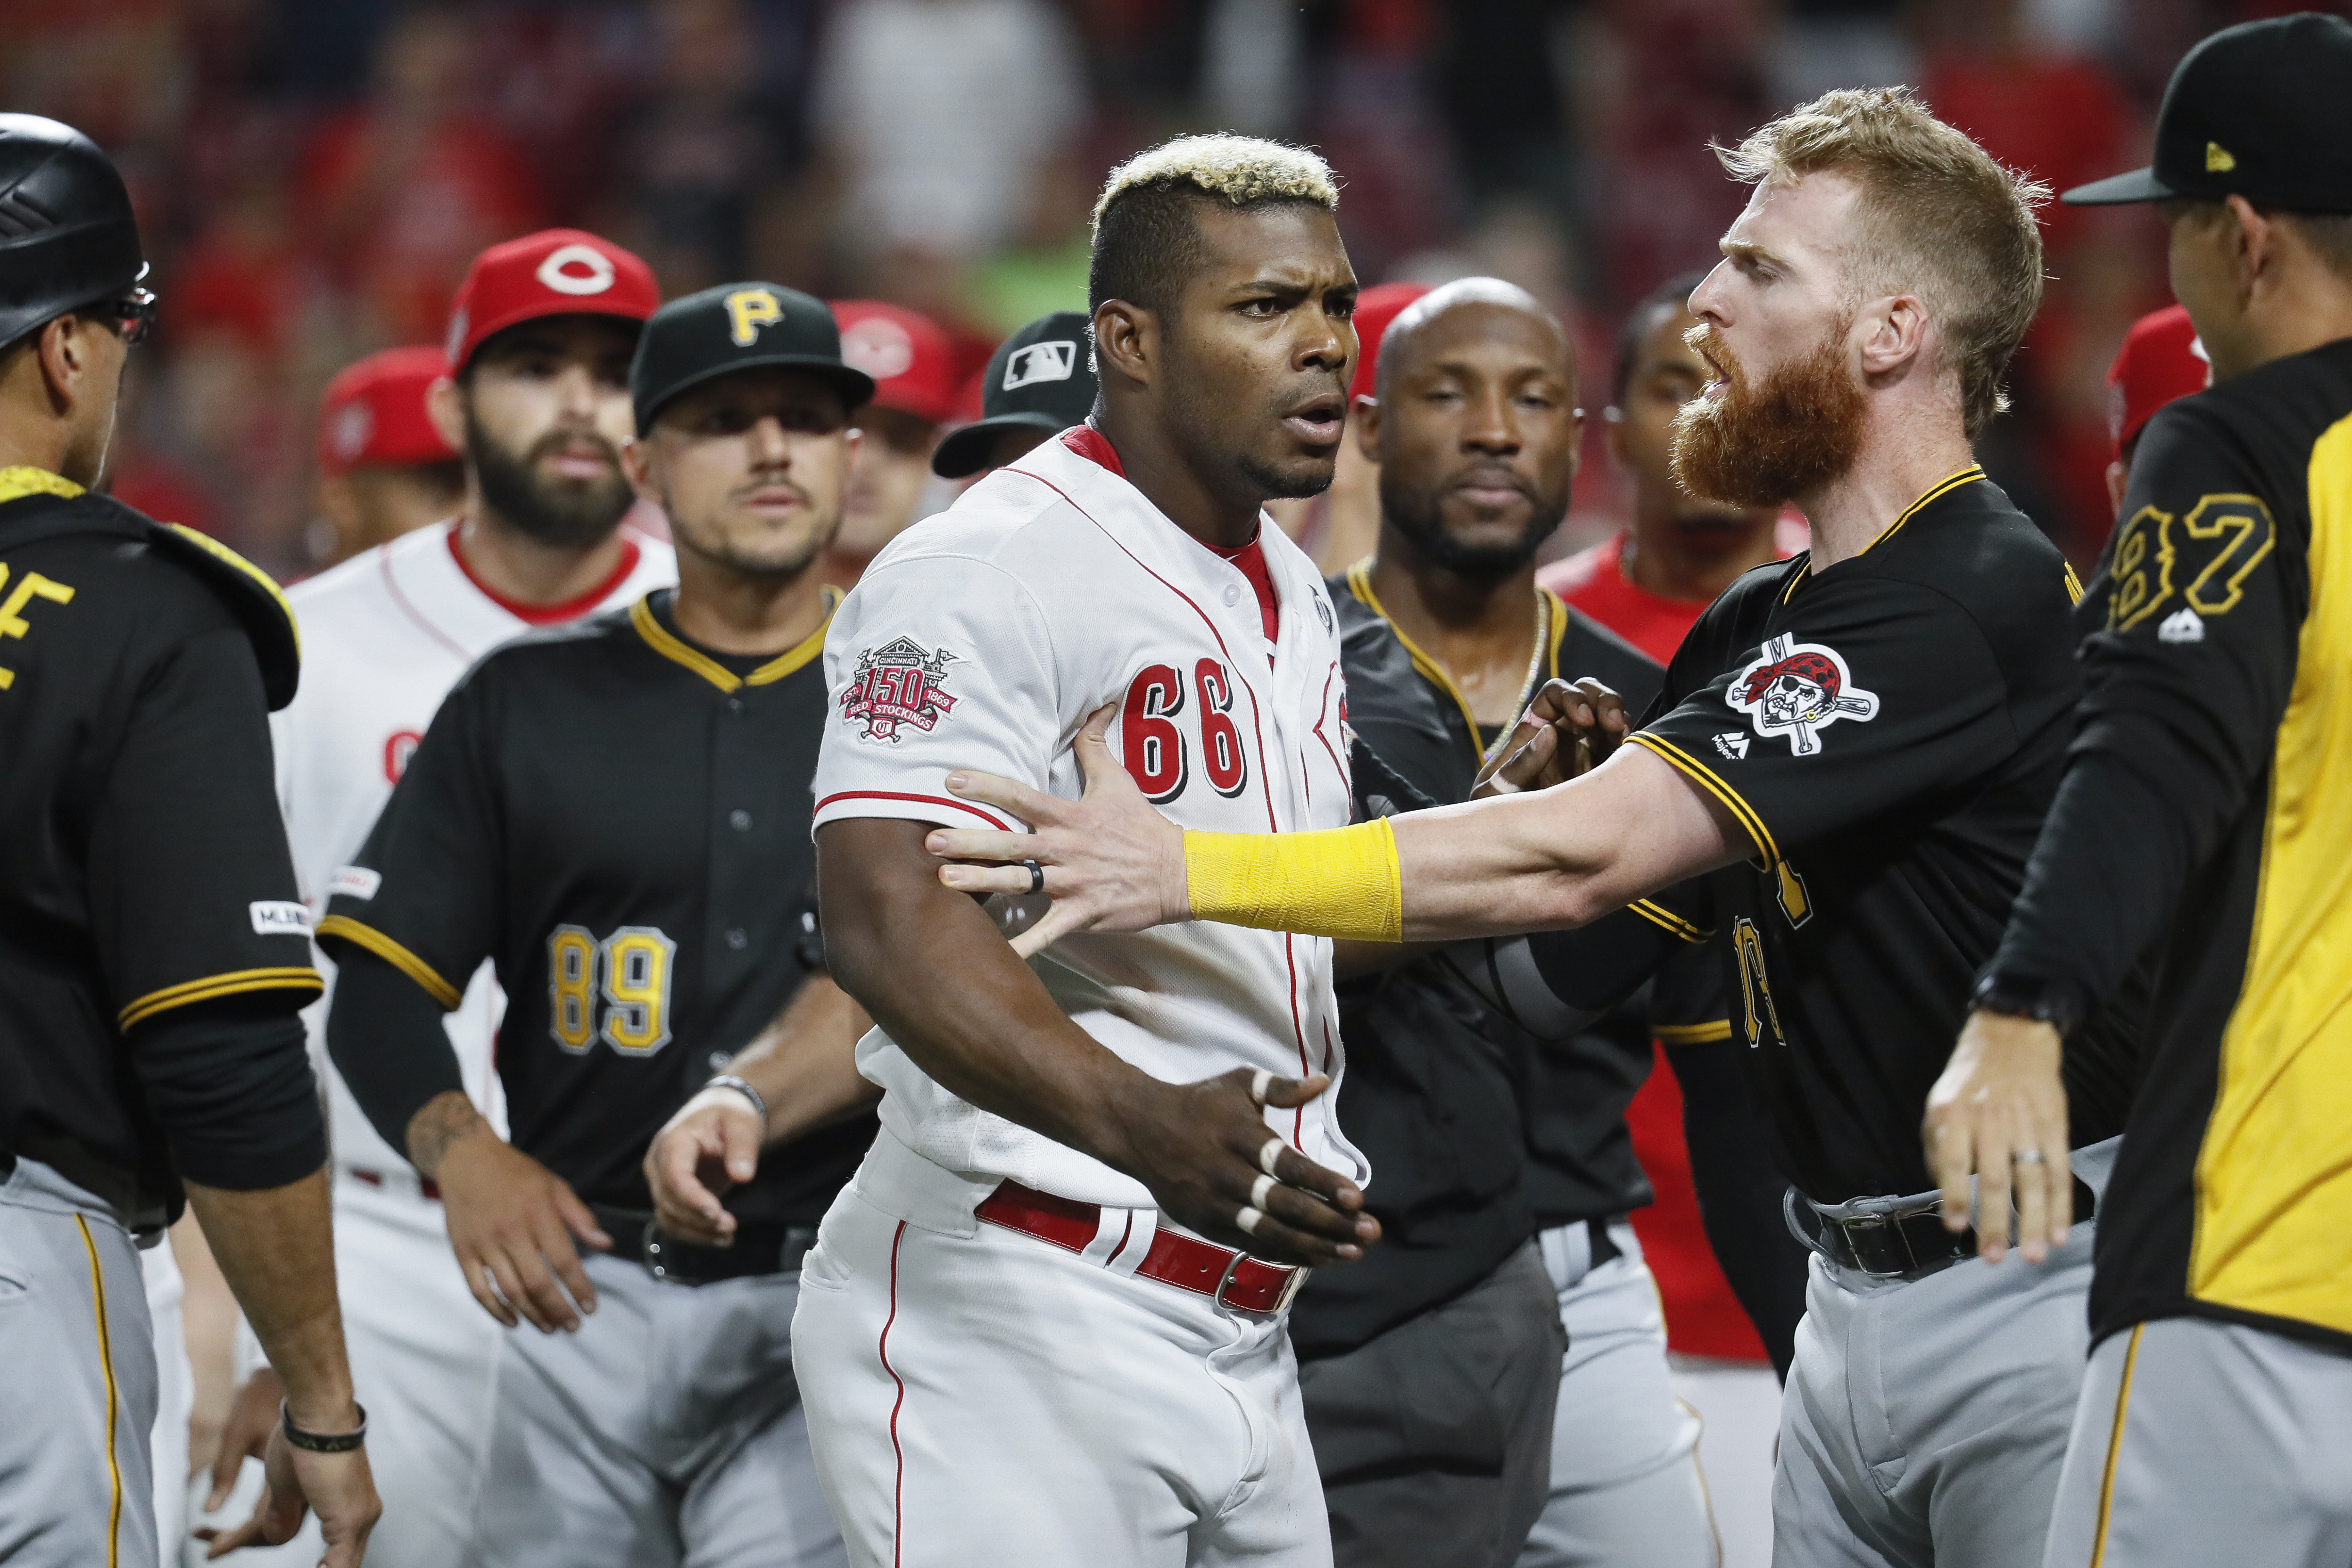 Yasiel Puig gets into brawl moments after news that Reds traded him -  Washington Times